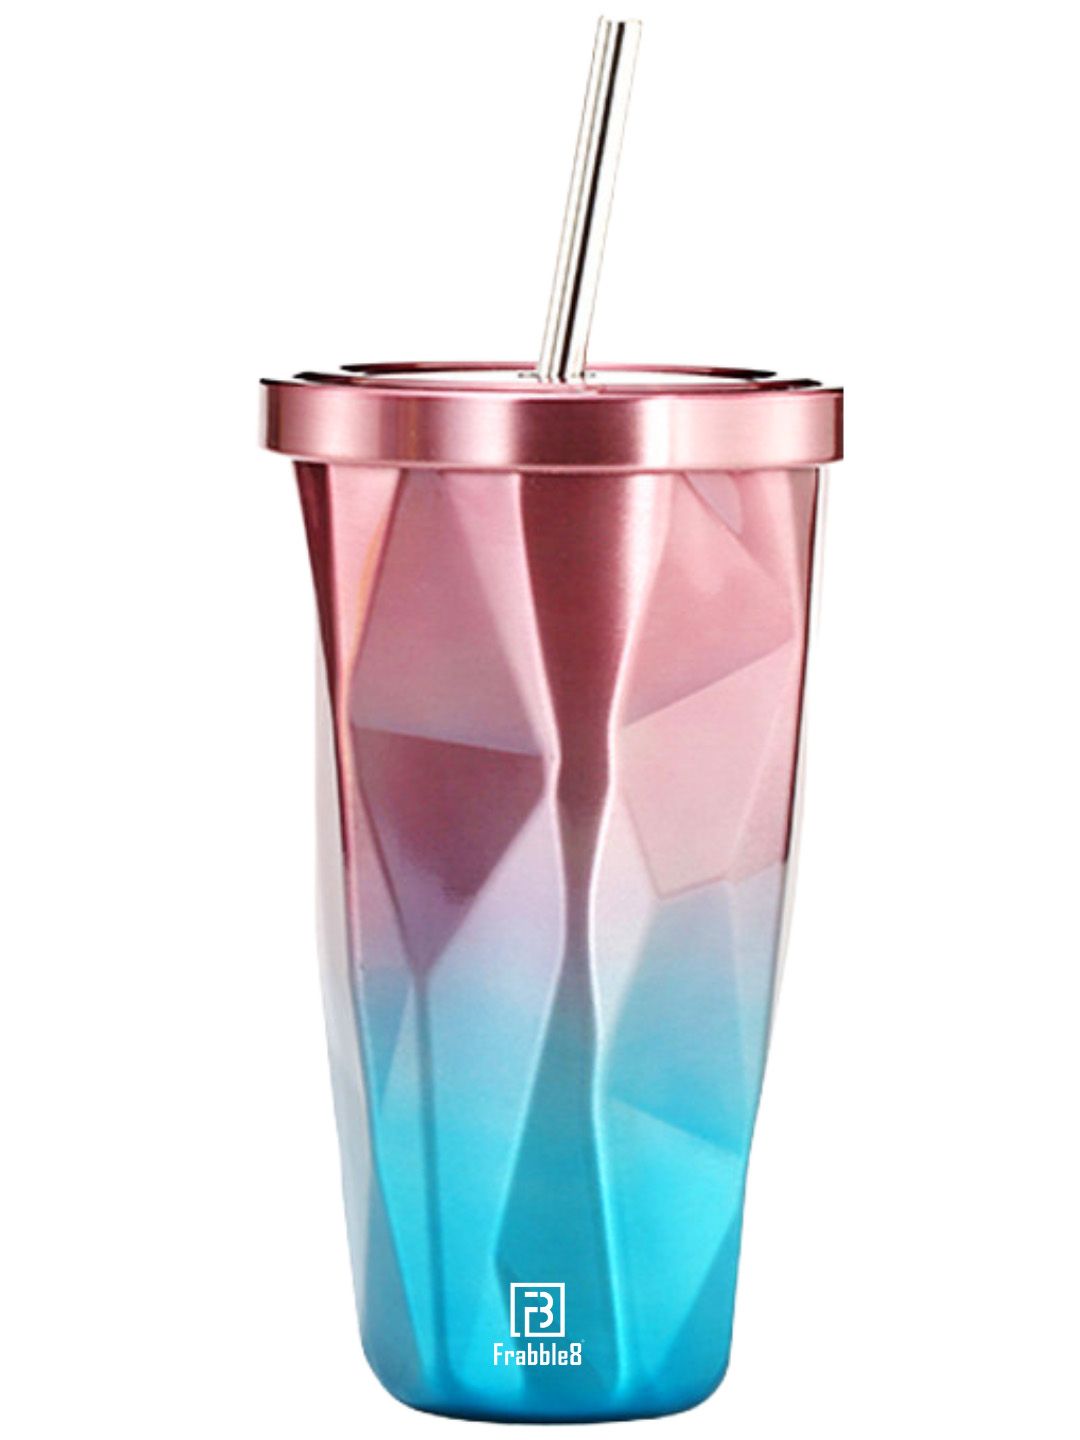 Frabble8 Pink & Blue Vacuum Insulated Stainless Steel Tumbler with Steel Straw 500 ml Price in India